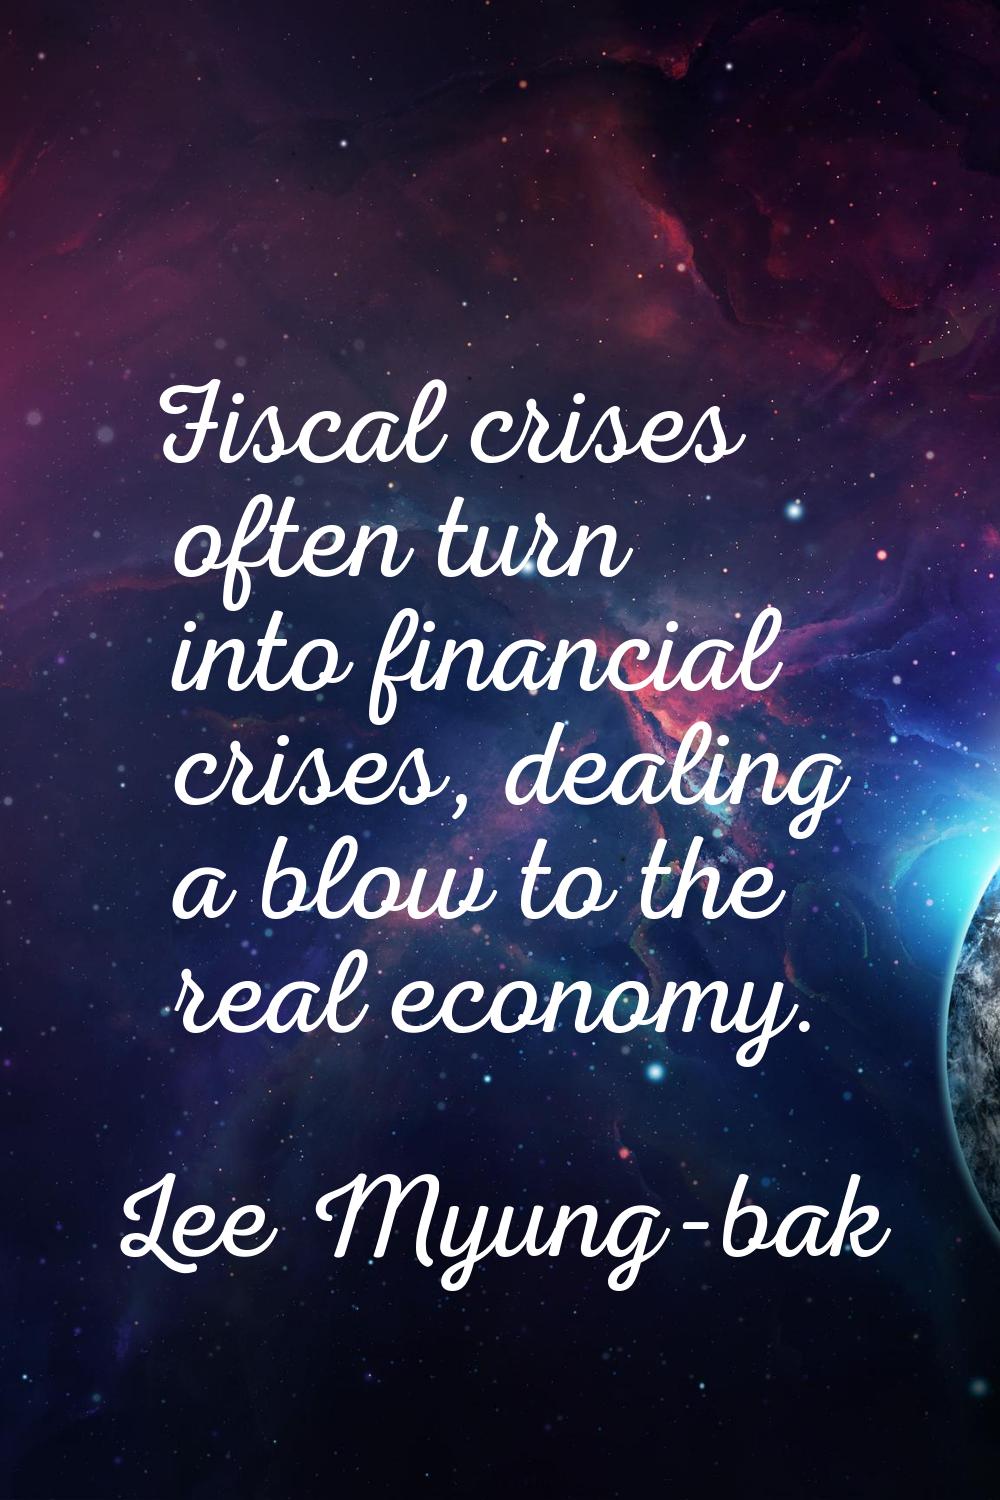 Fiscal crises often turn into financial crises, dealing a blow to the real economy.